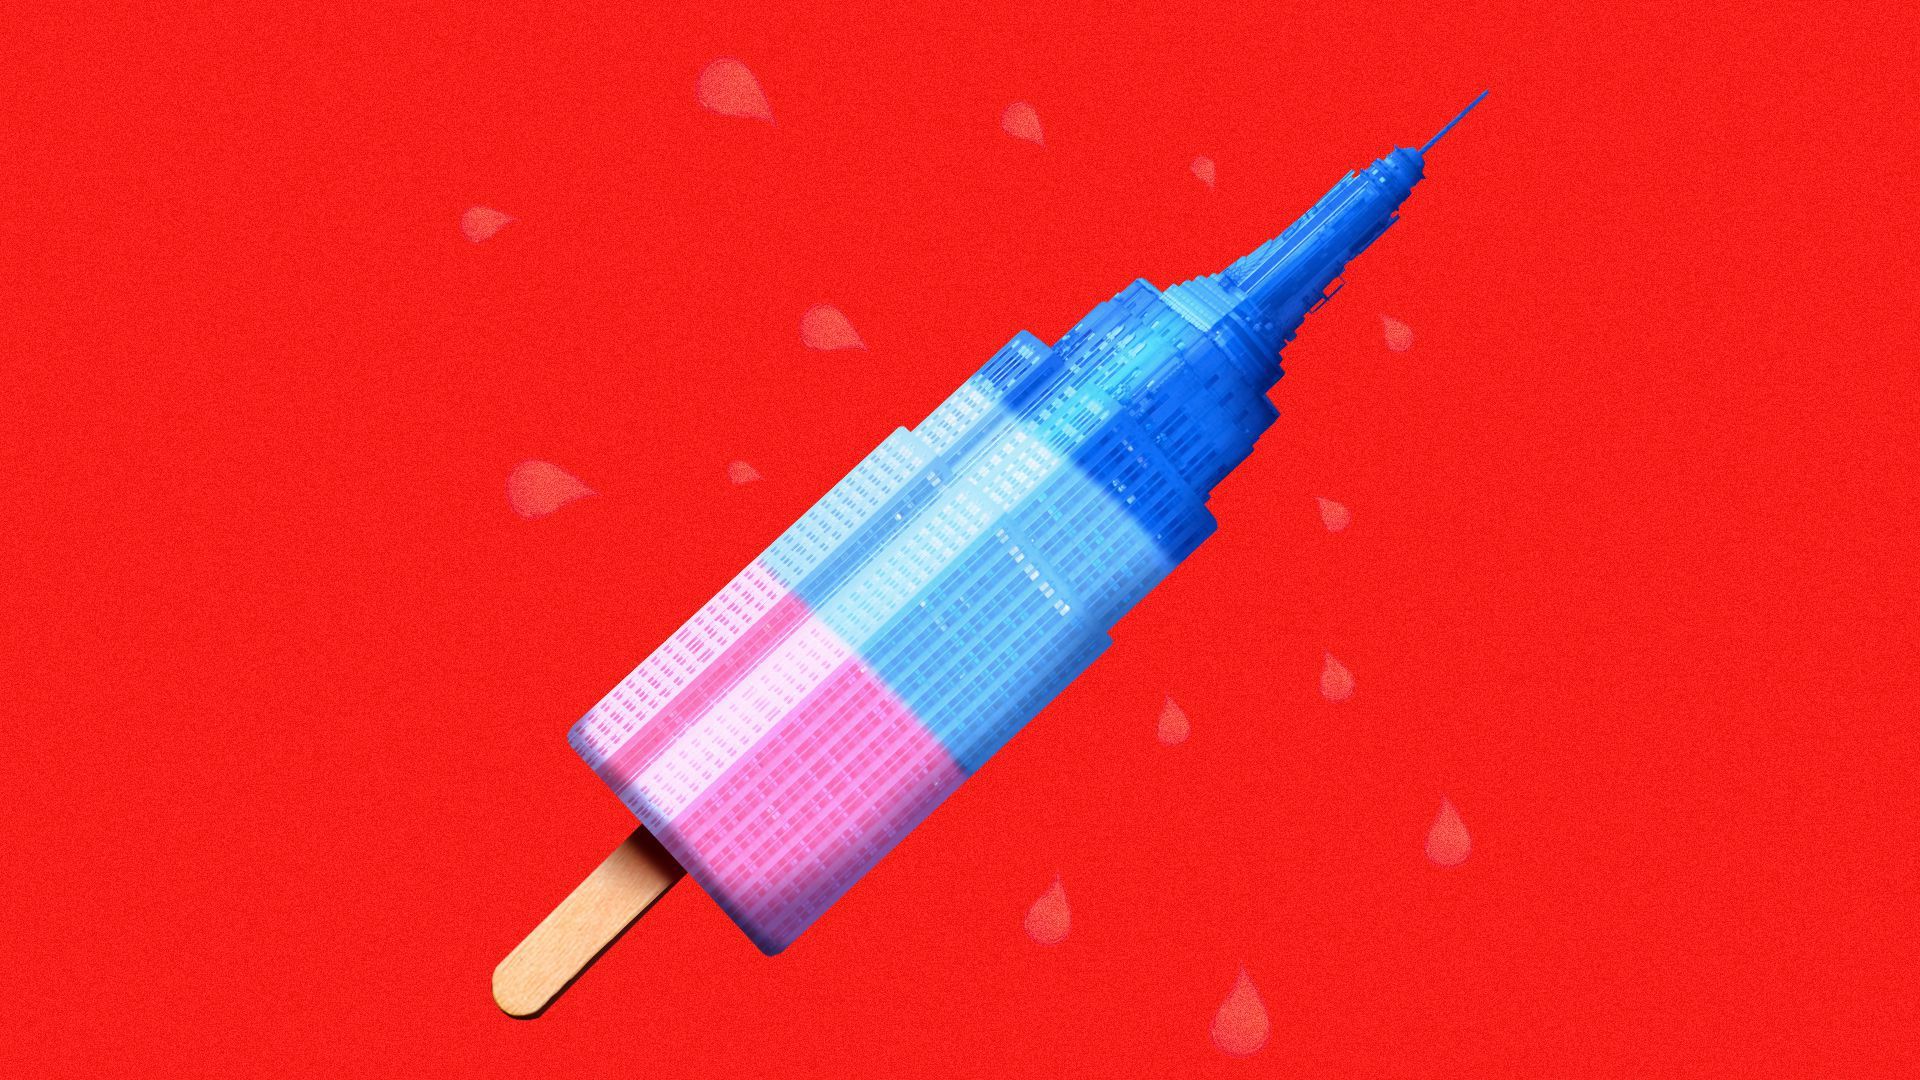 Illustration of a building in the shape of a sweating popsicle.